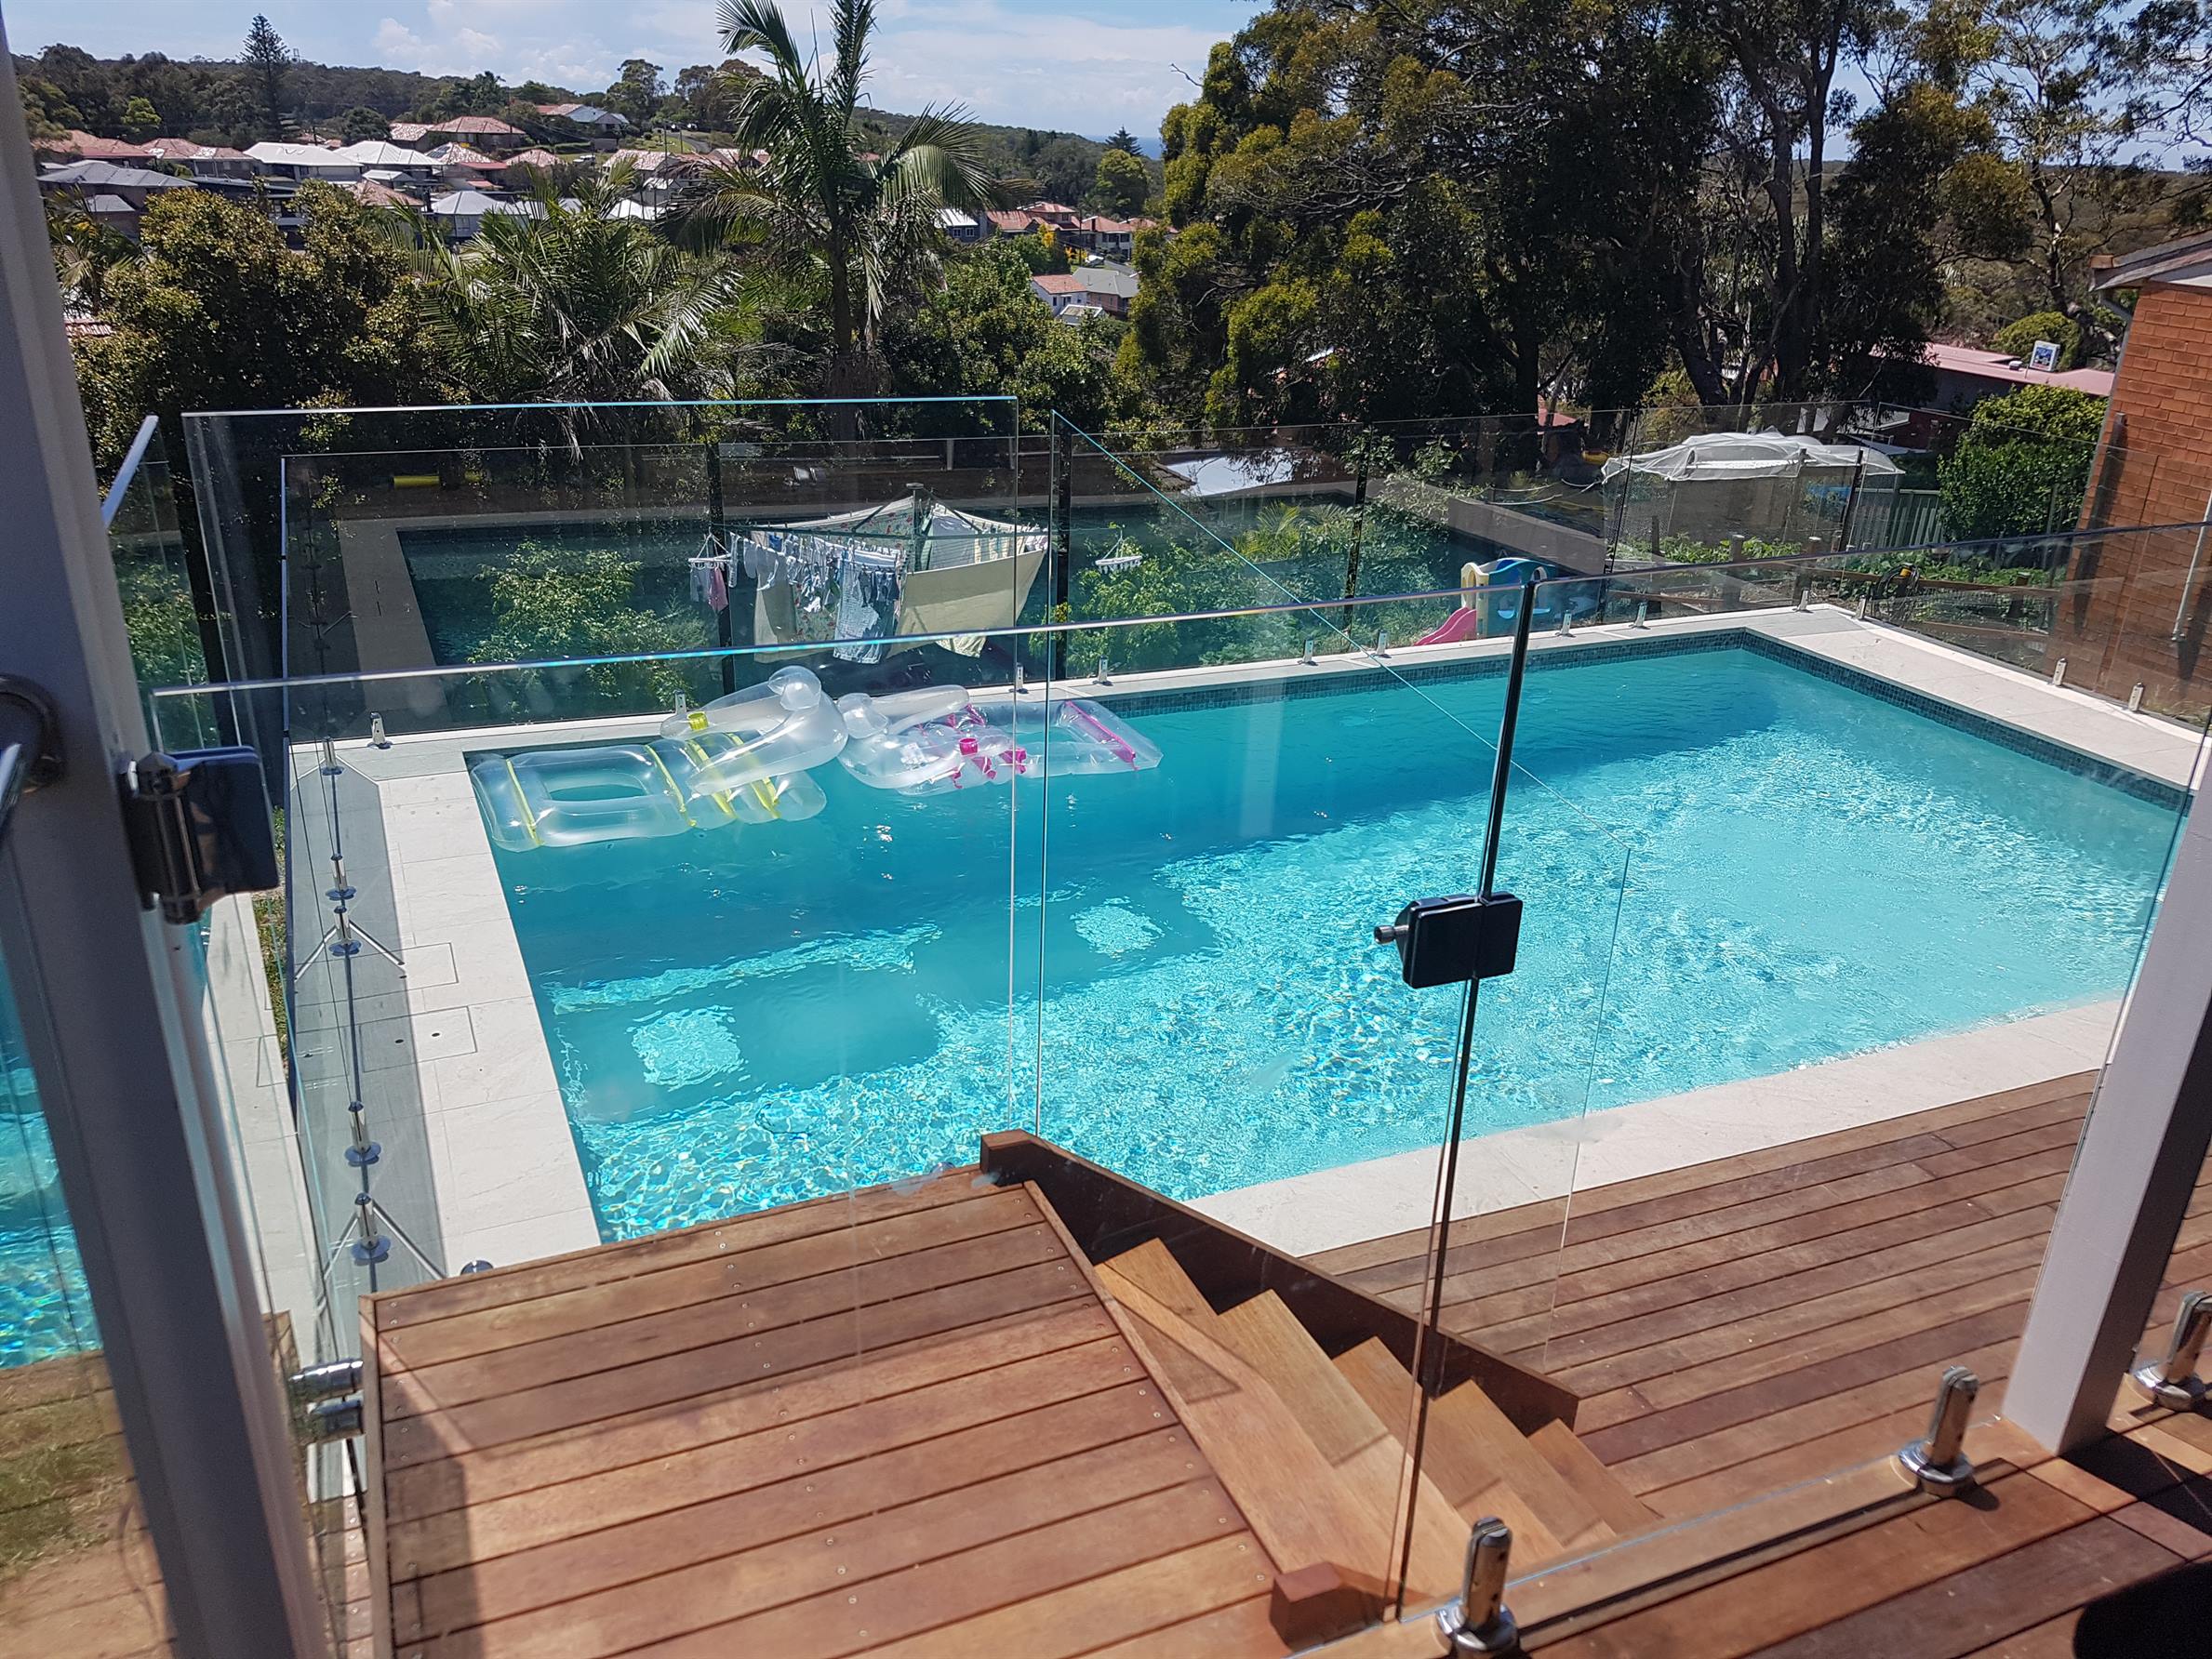 How Can A Quality Glass Pool Fence Add Value To Your Home?